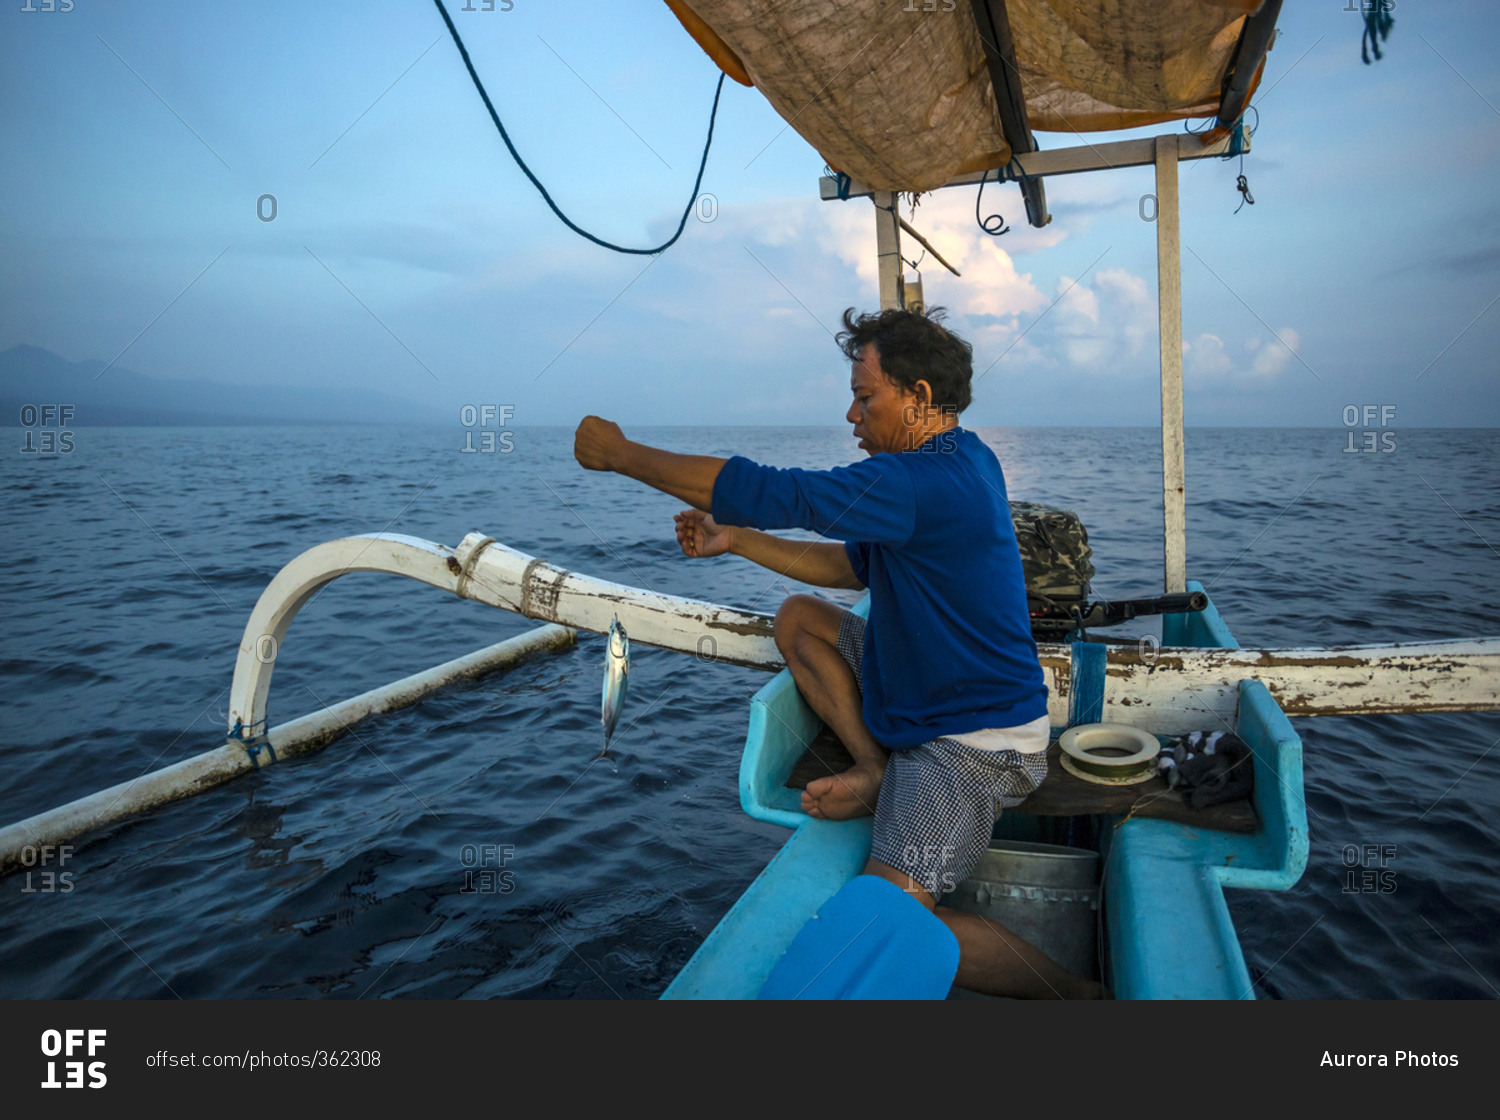 Balinese traditional fisherman with a fish on his line